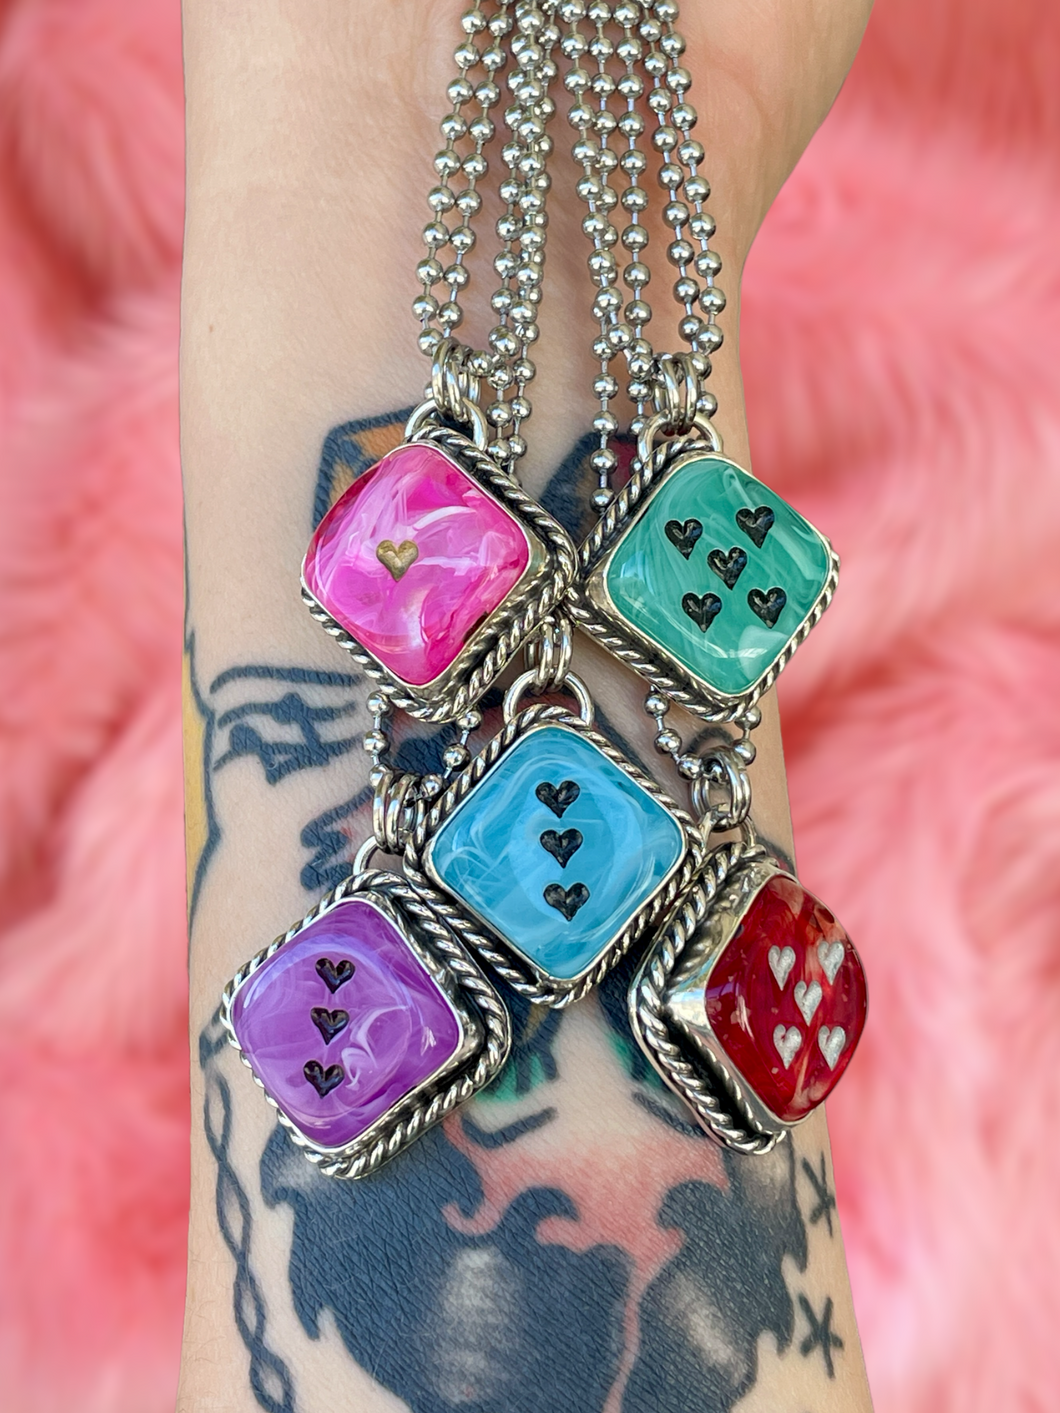 Let’s Roll Dice Necklace